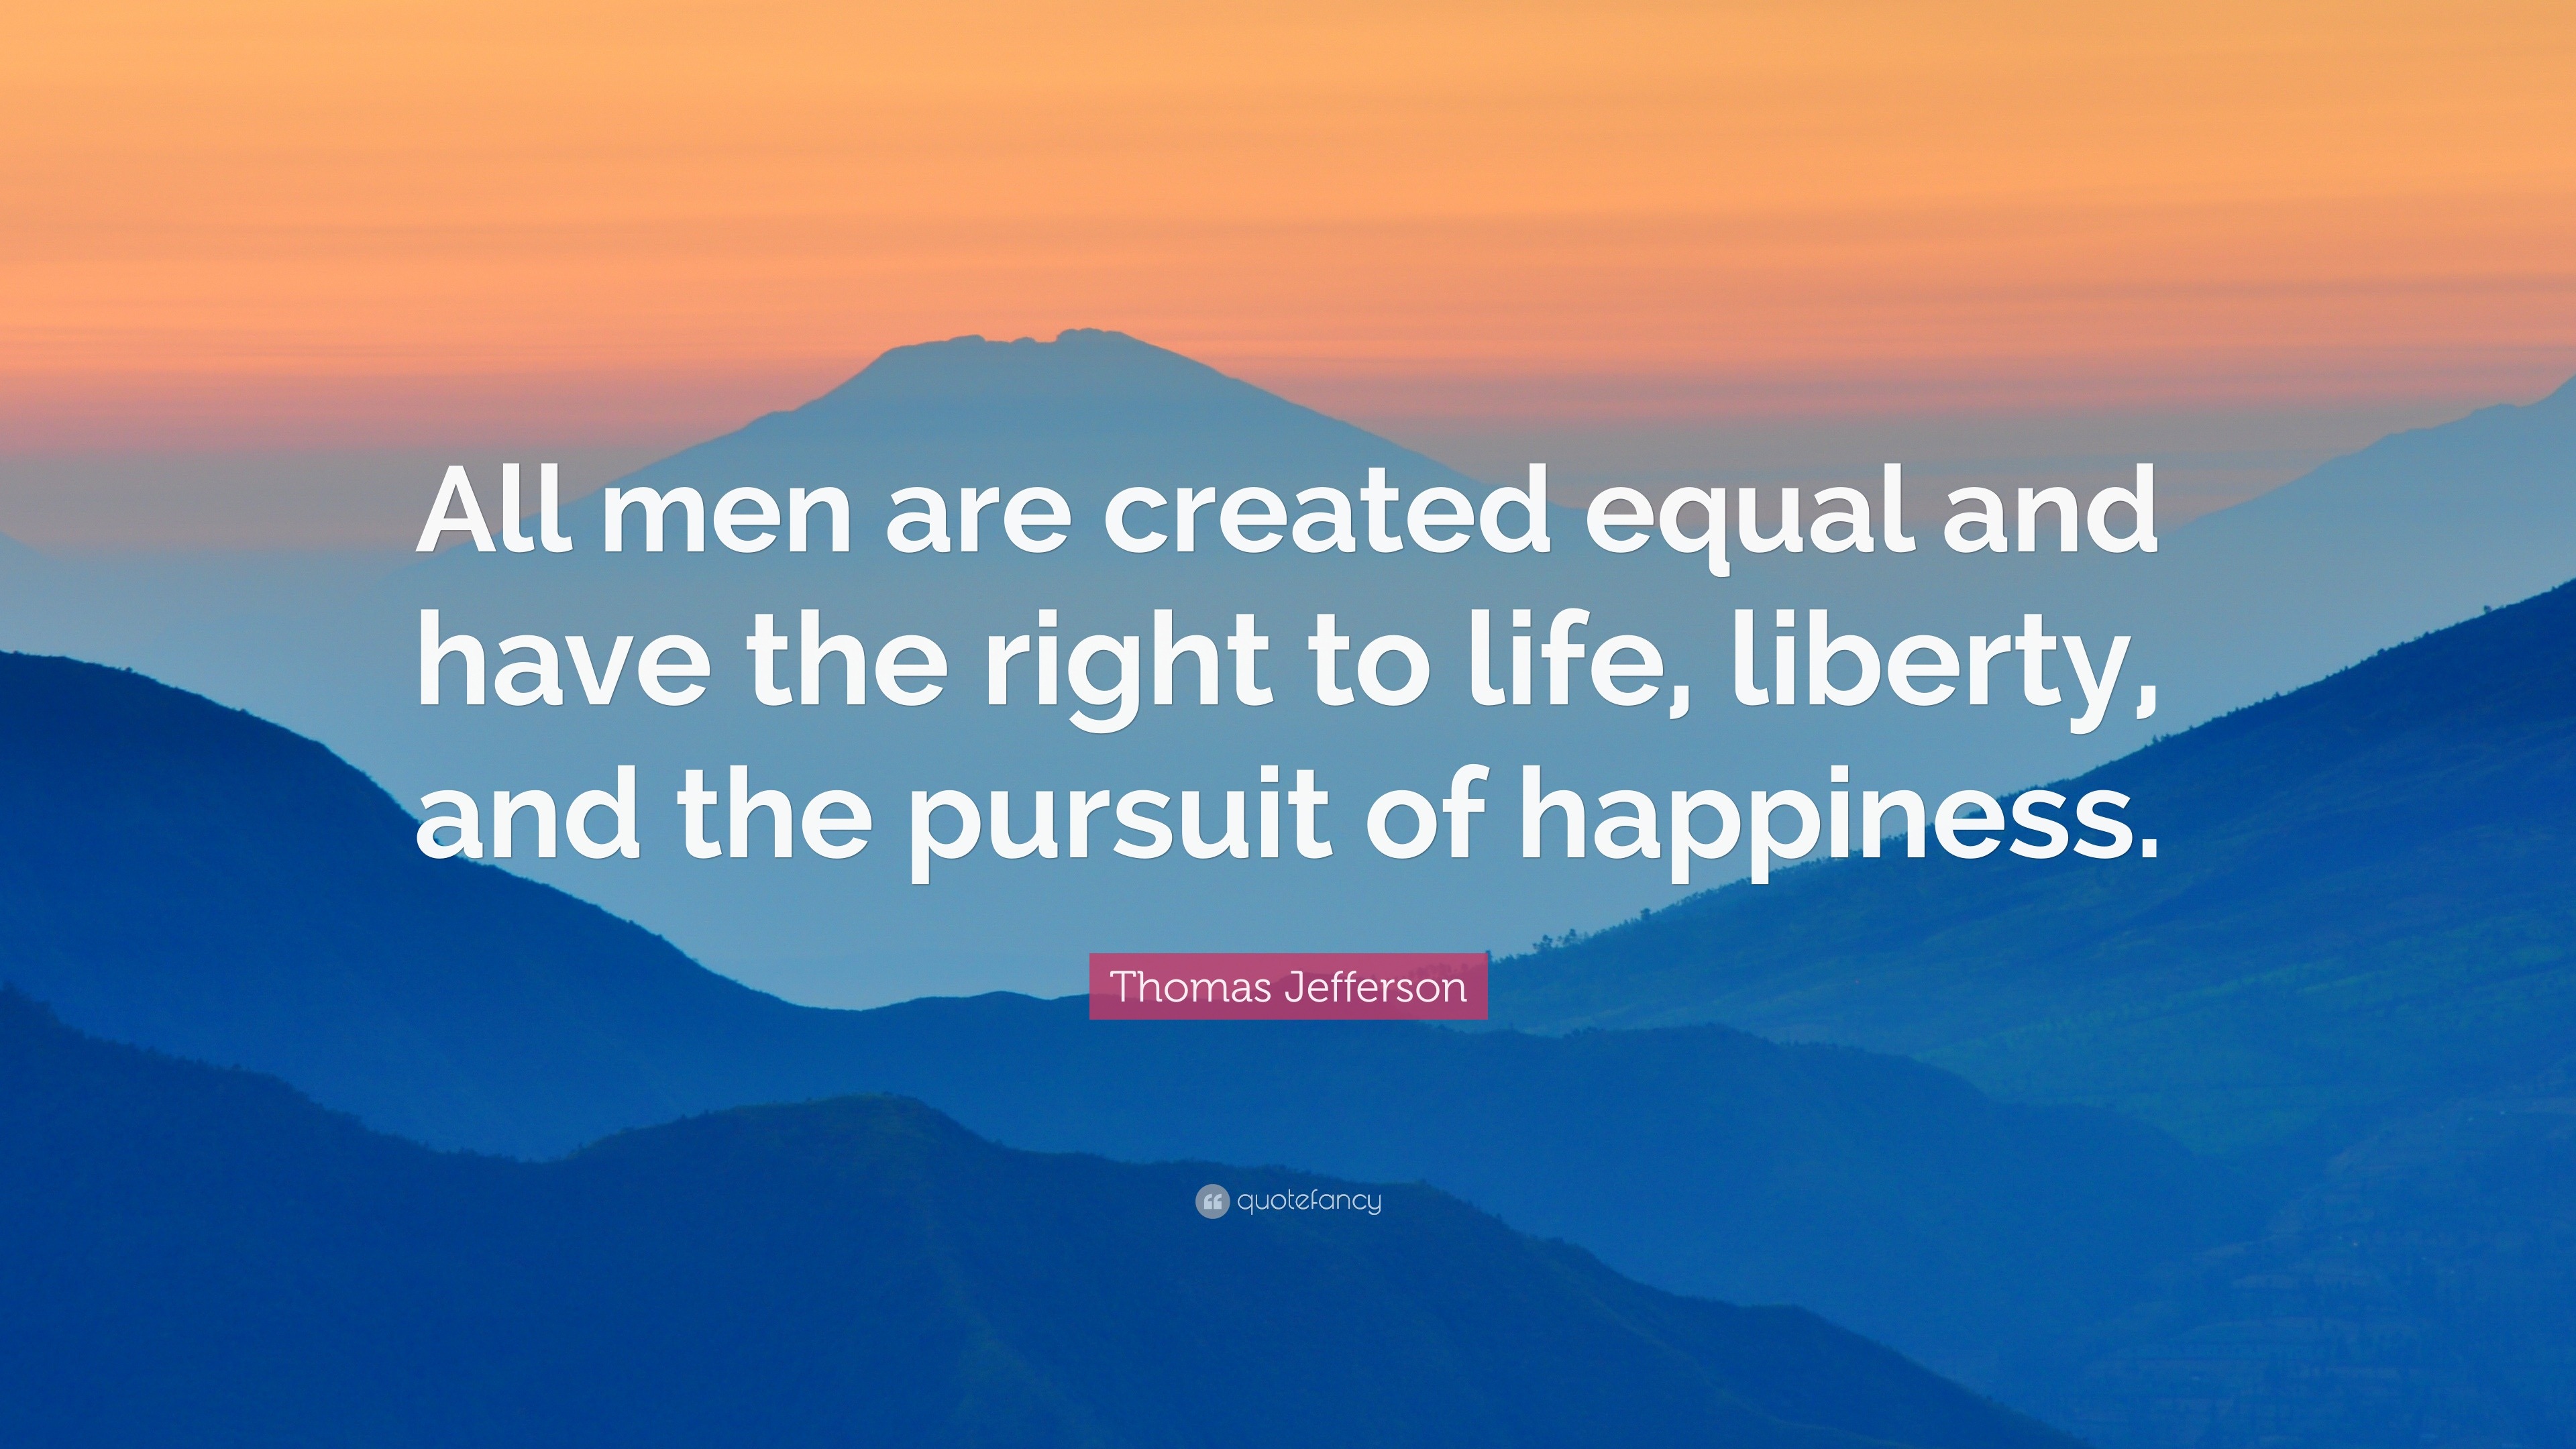 Thomas Jefferson Quote: “All men are created equal and have the right